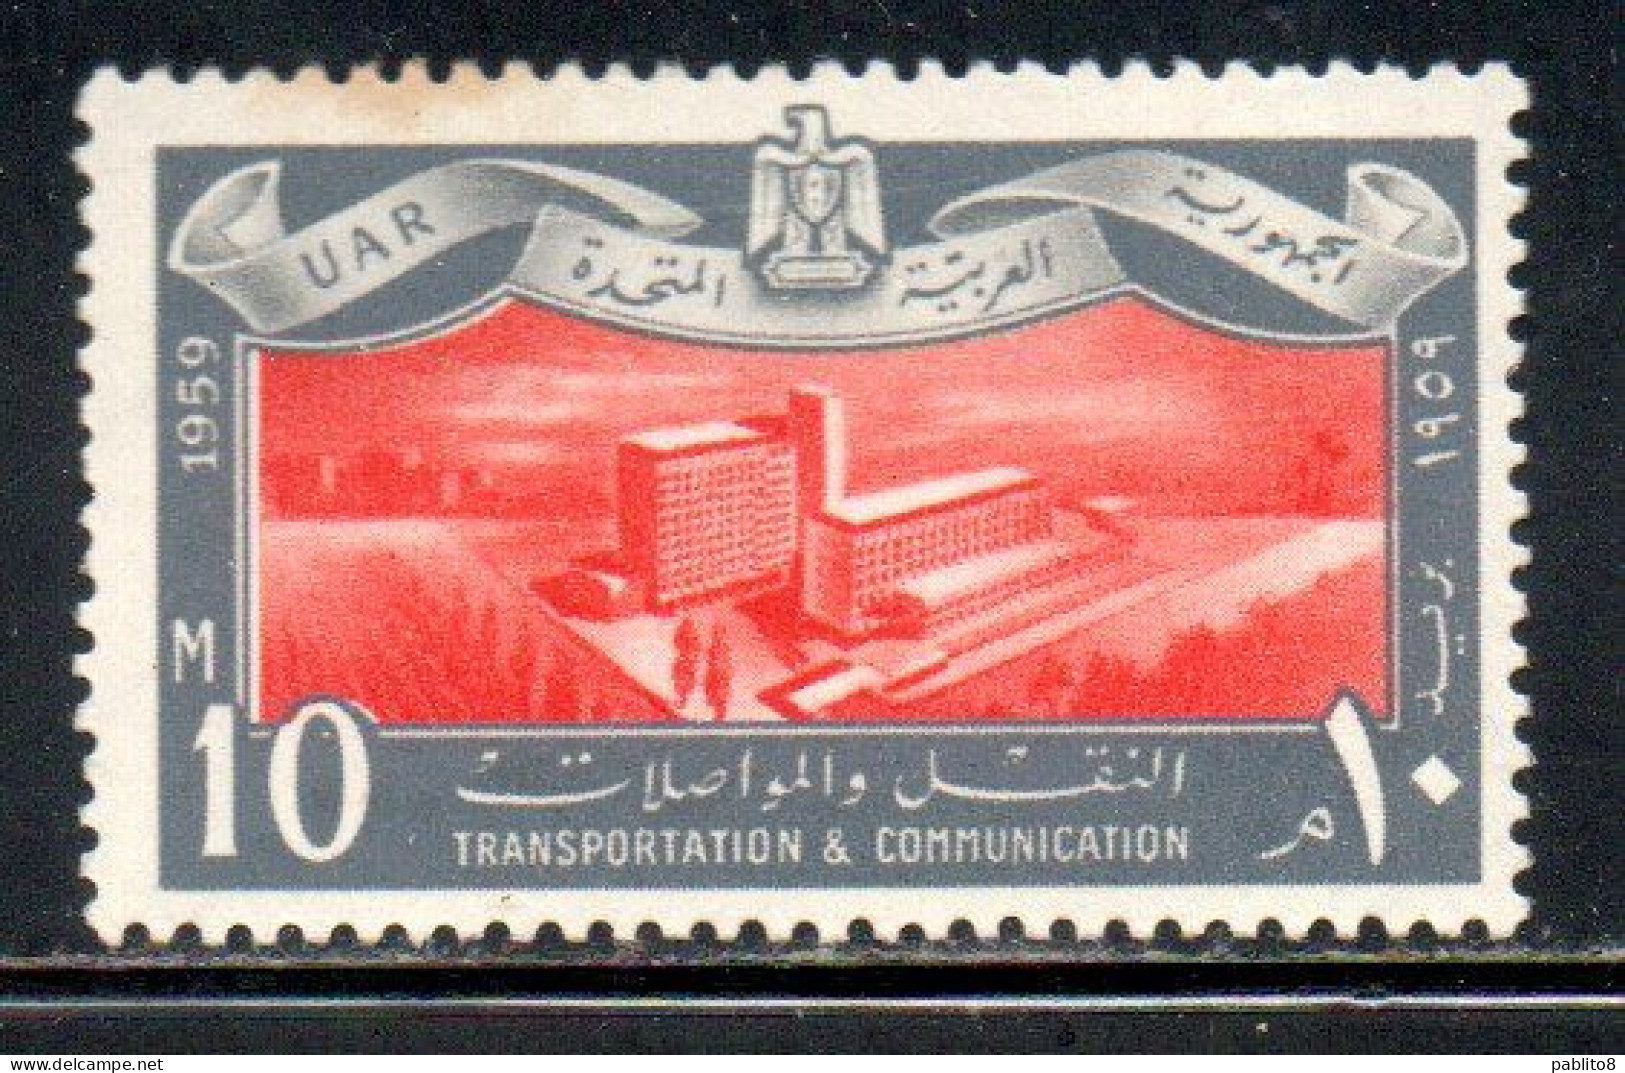 UAR EGYPT EGITTO 1959 TRANSPORTATION AND TELECOMMUNICATION STAMP PRINTING BUILDING HELIOPOLIS 10m  MH - Unused Stamps